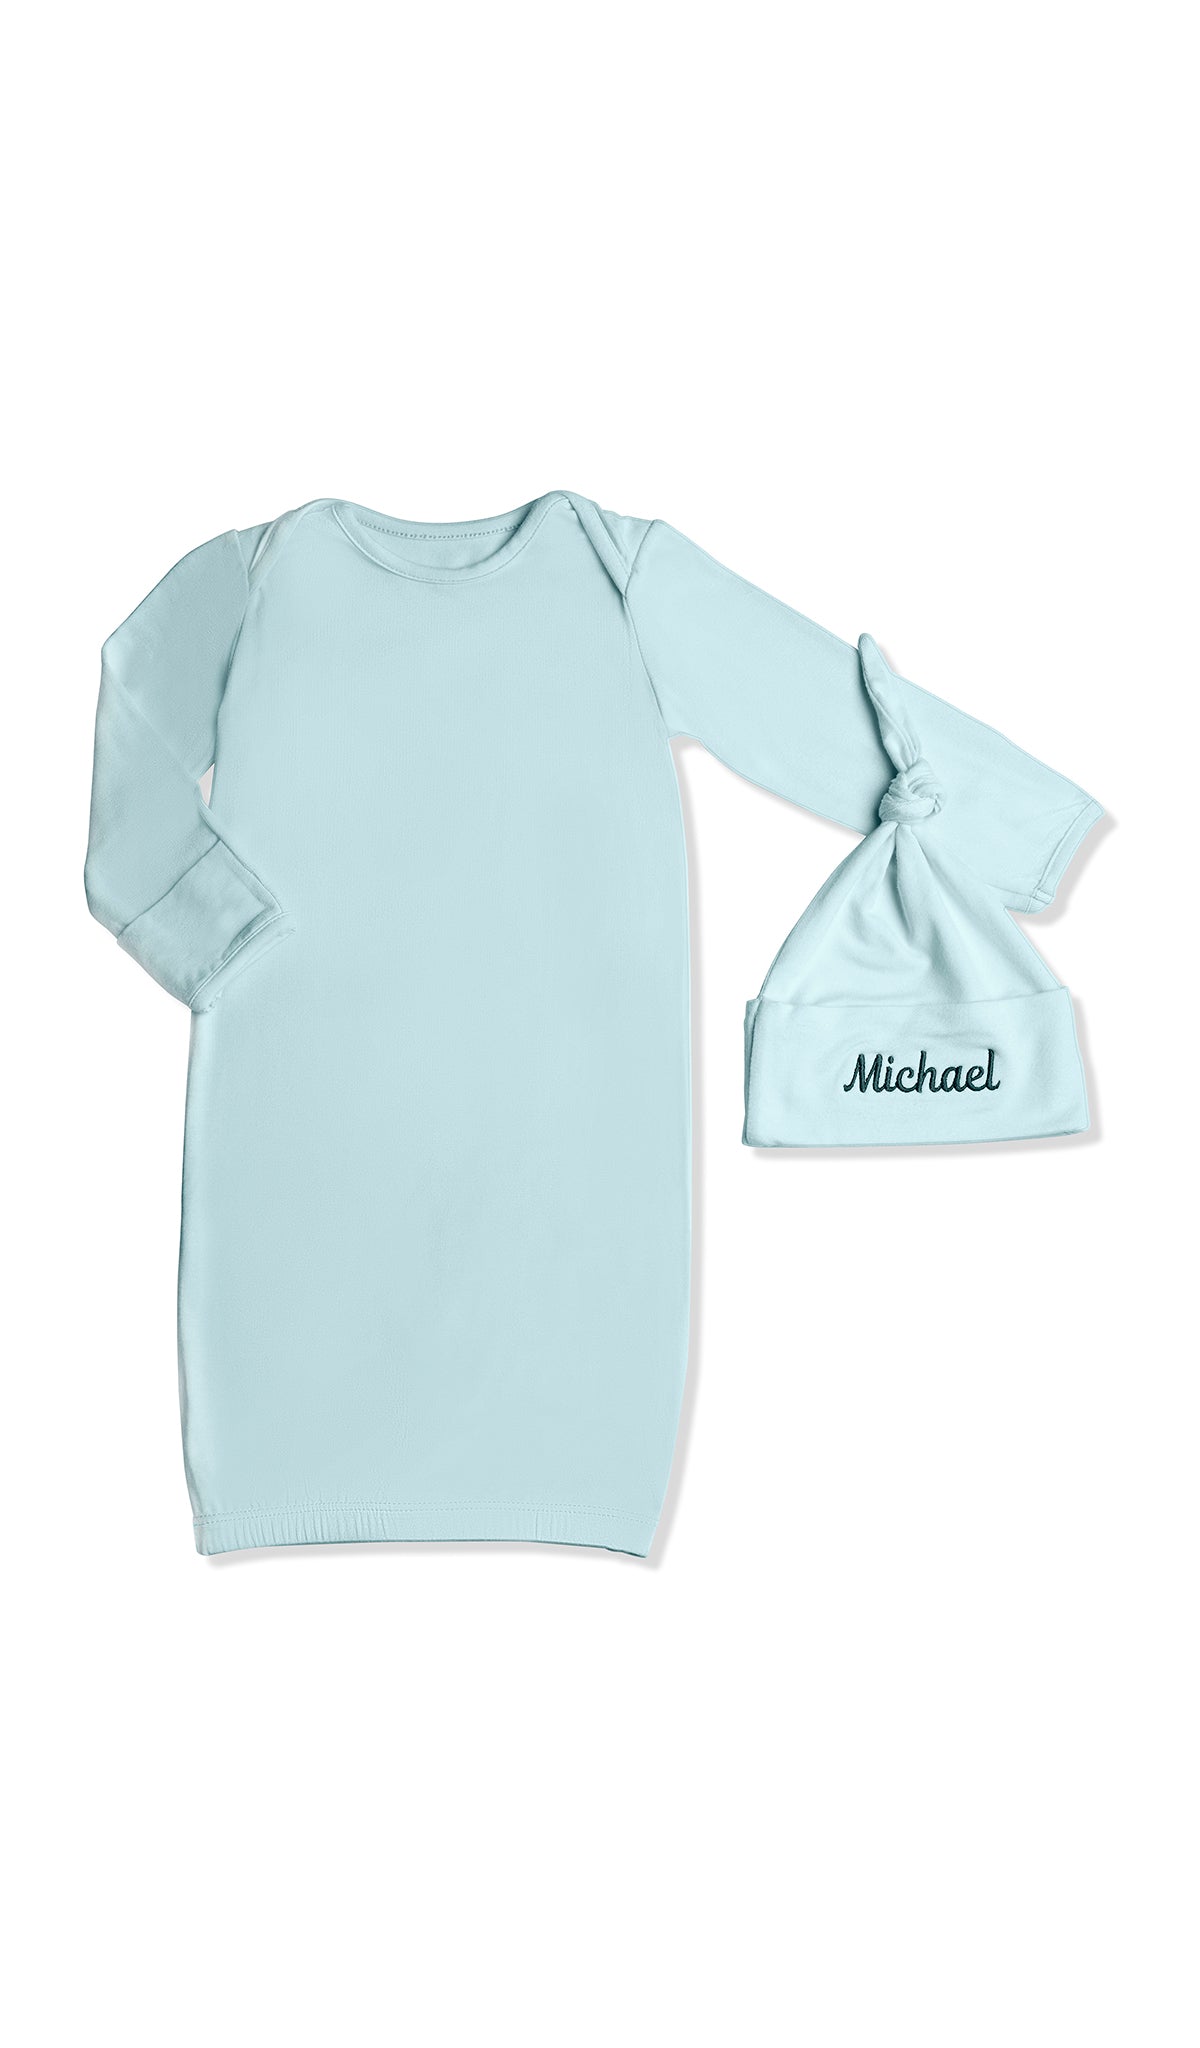 Baby gown with personalized, embroidered matching knotted hat.